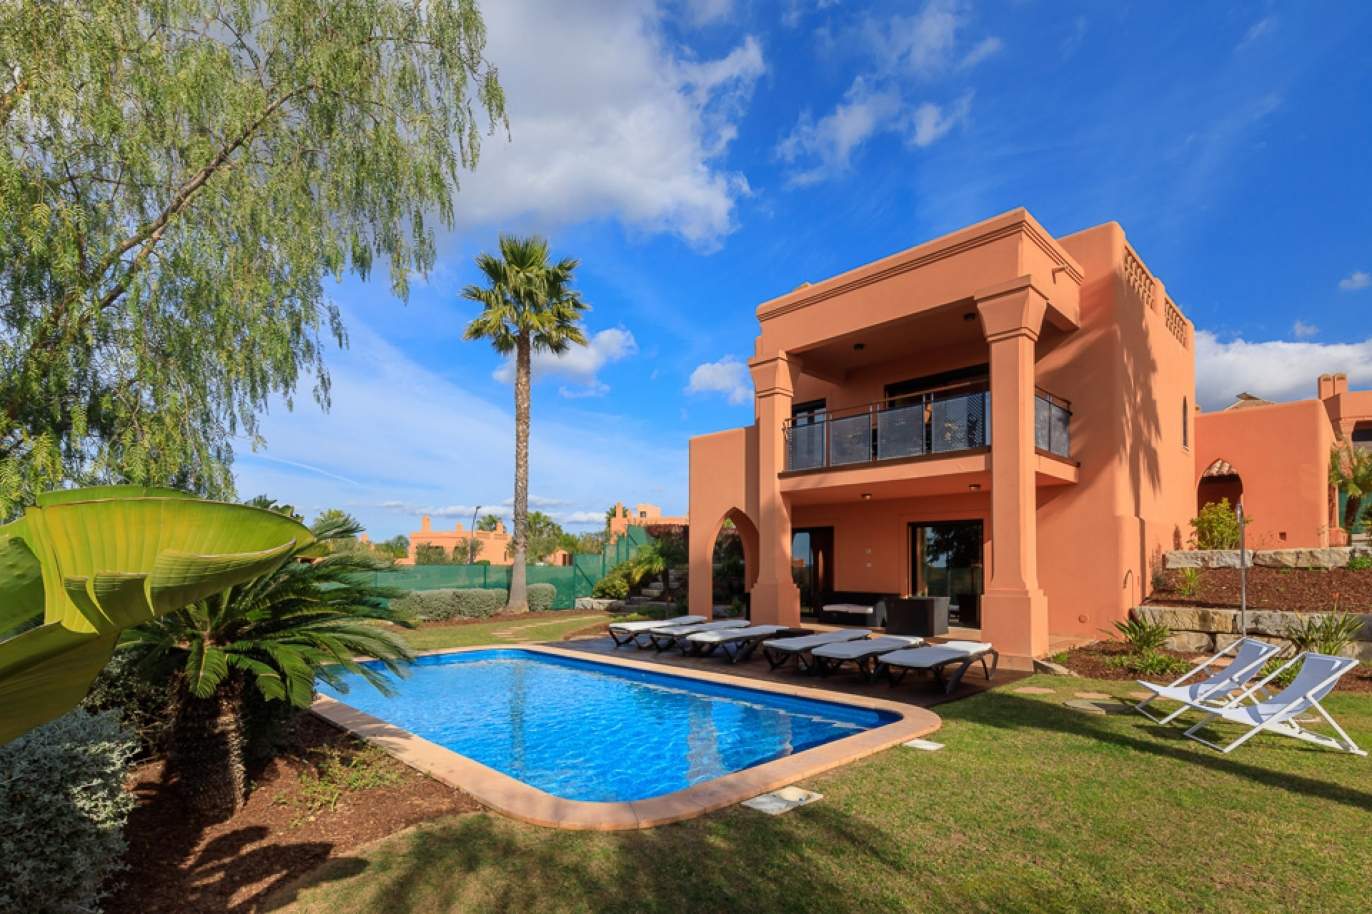 Sale of detached villa with private pool in Central Algarve, Portugal_139320